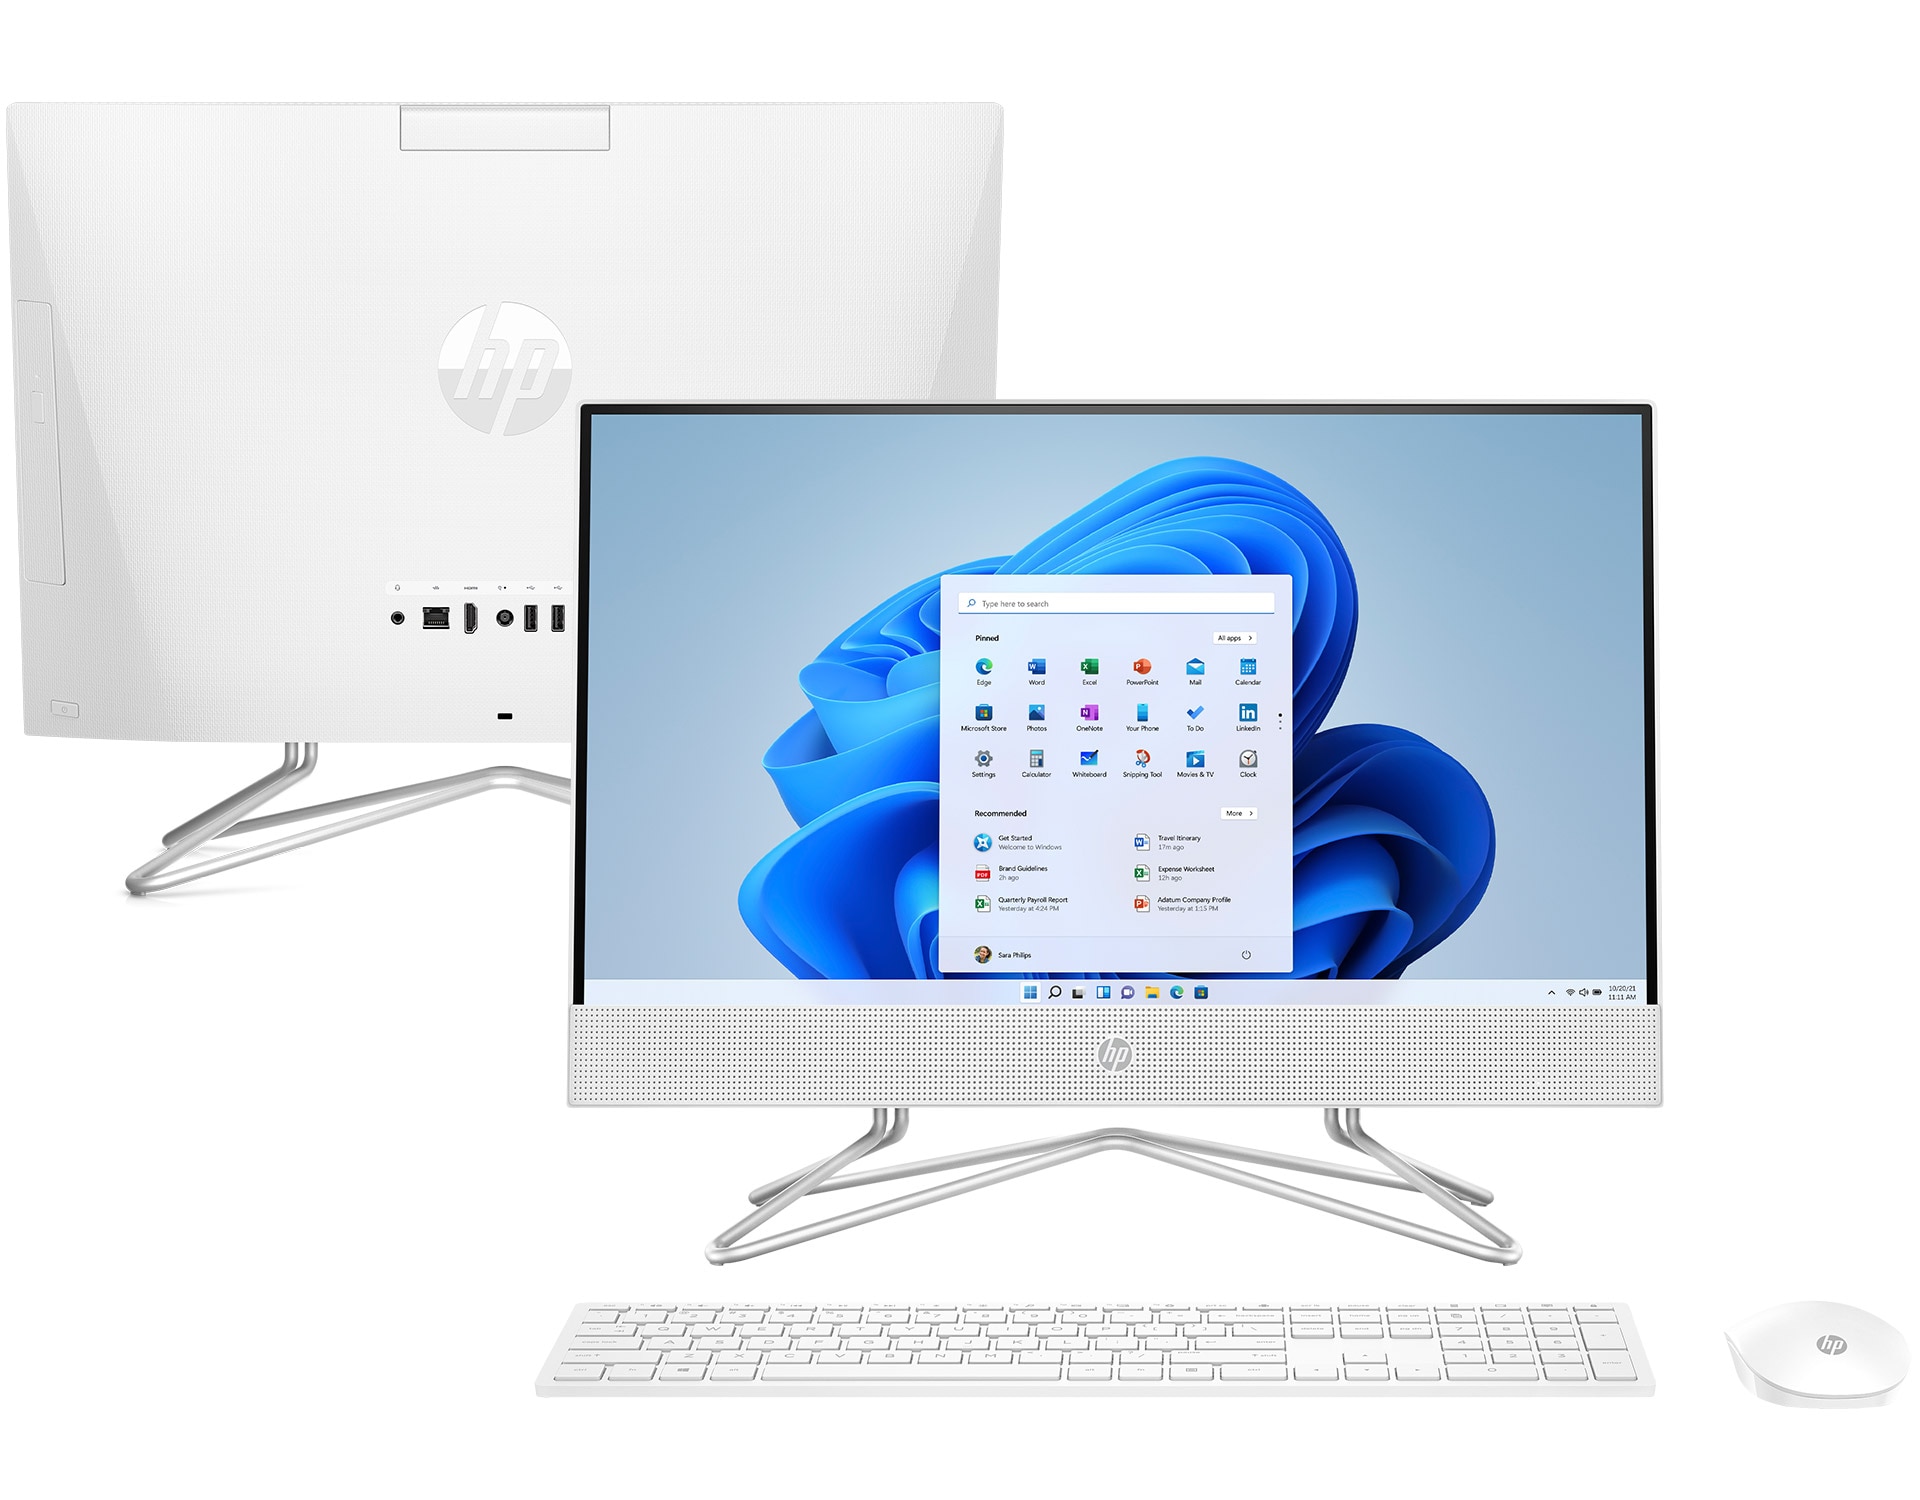 HP All-in-One 22-df（インテル） 製品詳細 - デスクトップパソコン | 日本HP